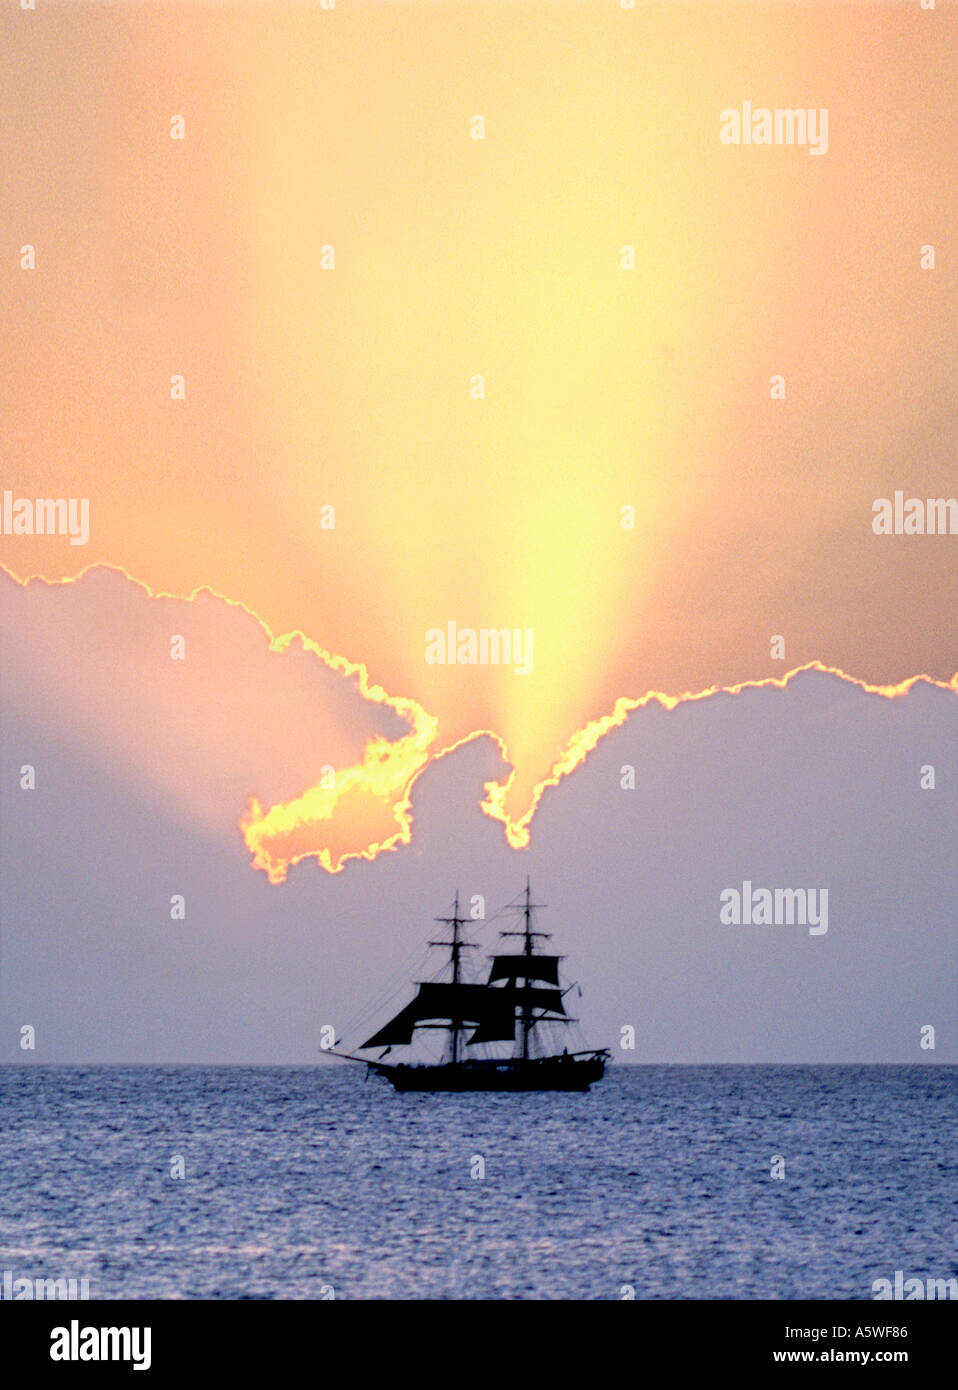 A boat silhouetted against the sunset in the Caribbean. Stock Photo